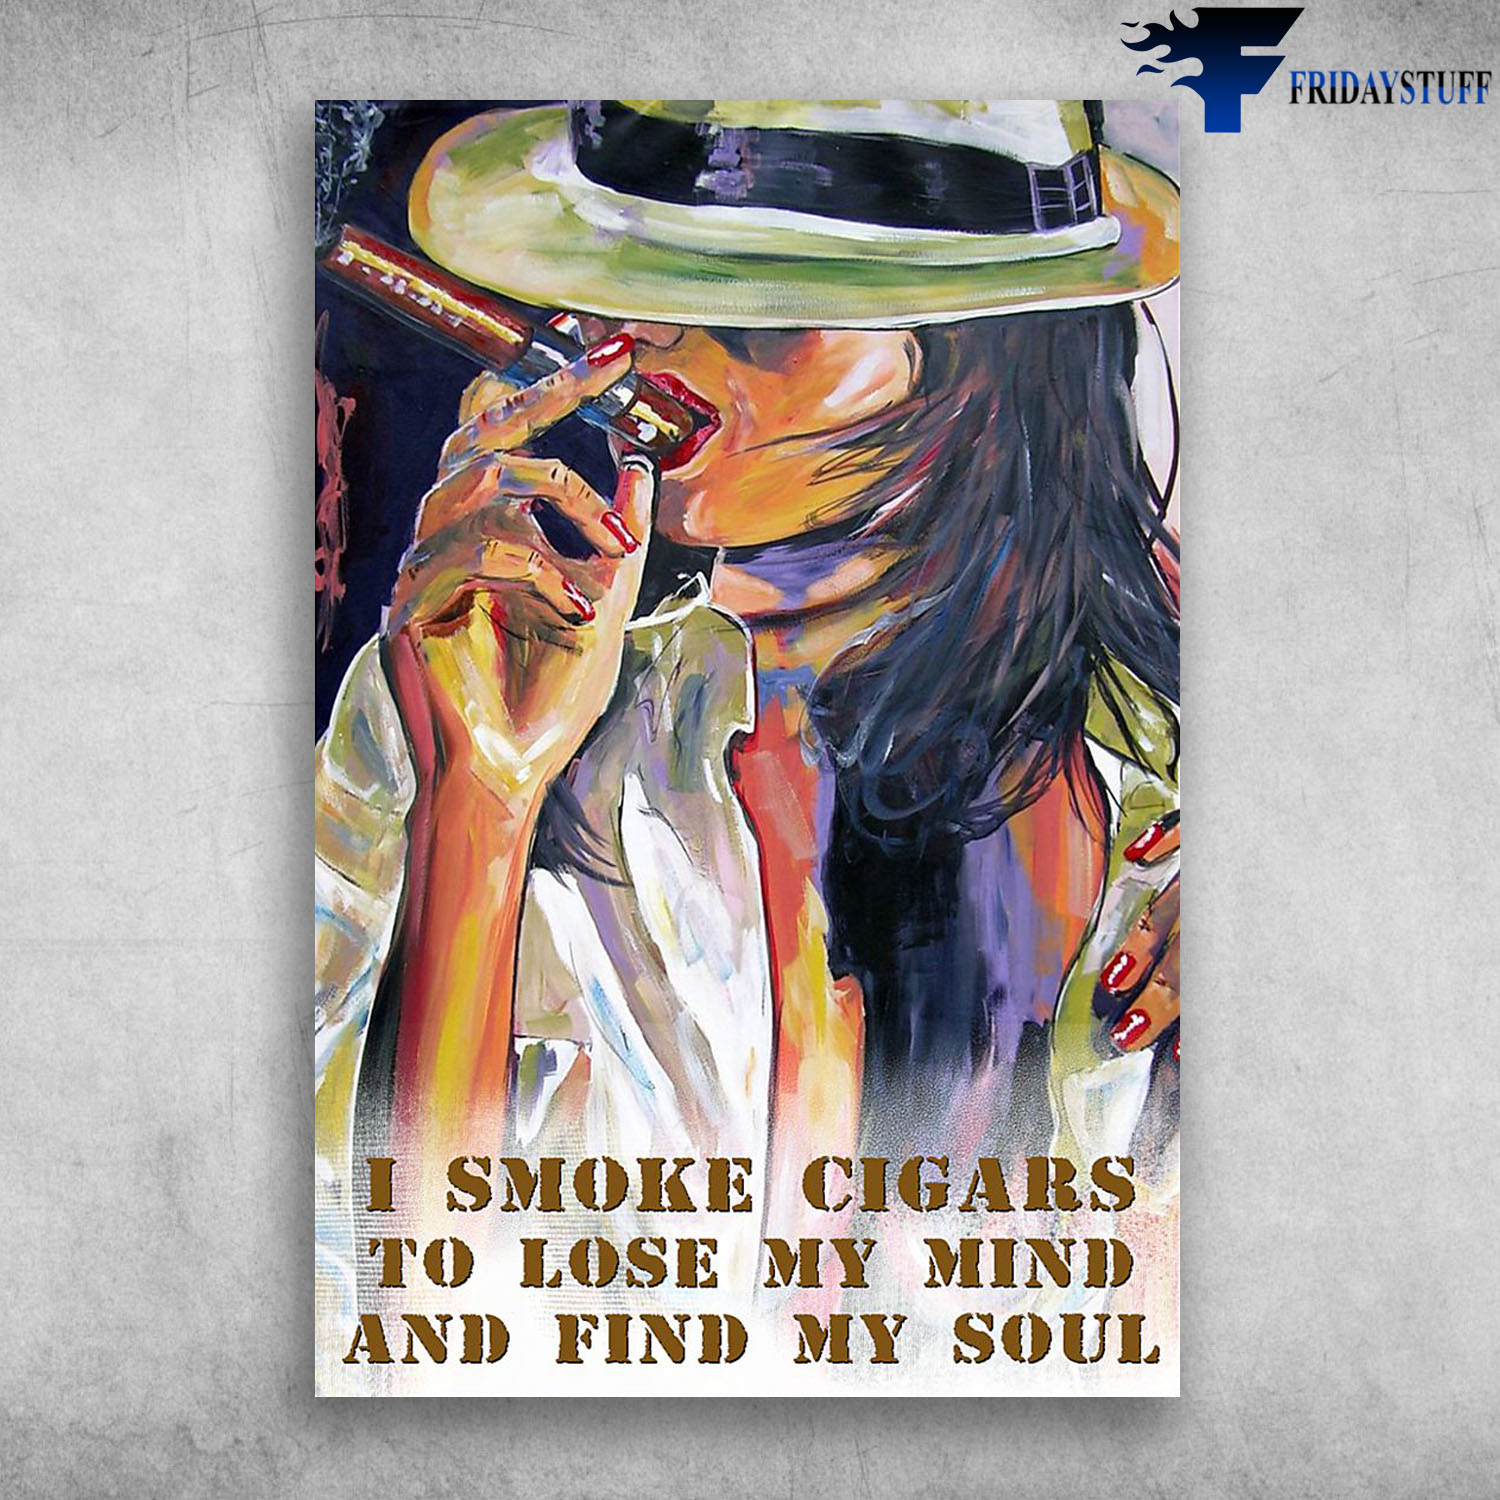 BeautifuI Girl Smoking Cigarette Smoke Cigars To Lose My Mind And FInd My Soul